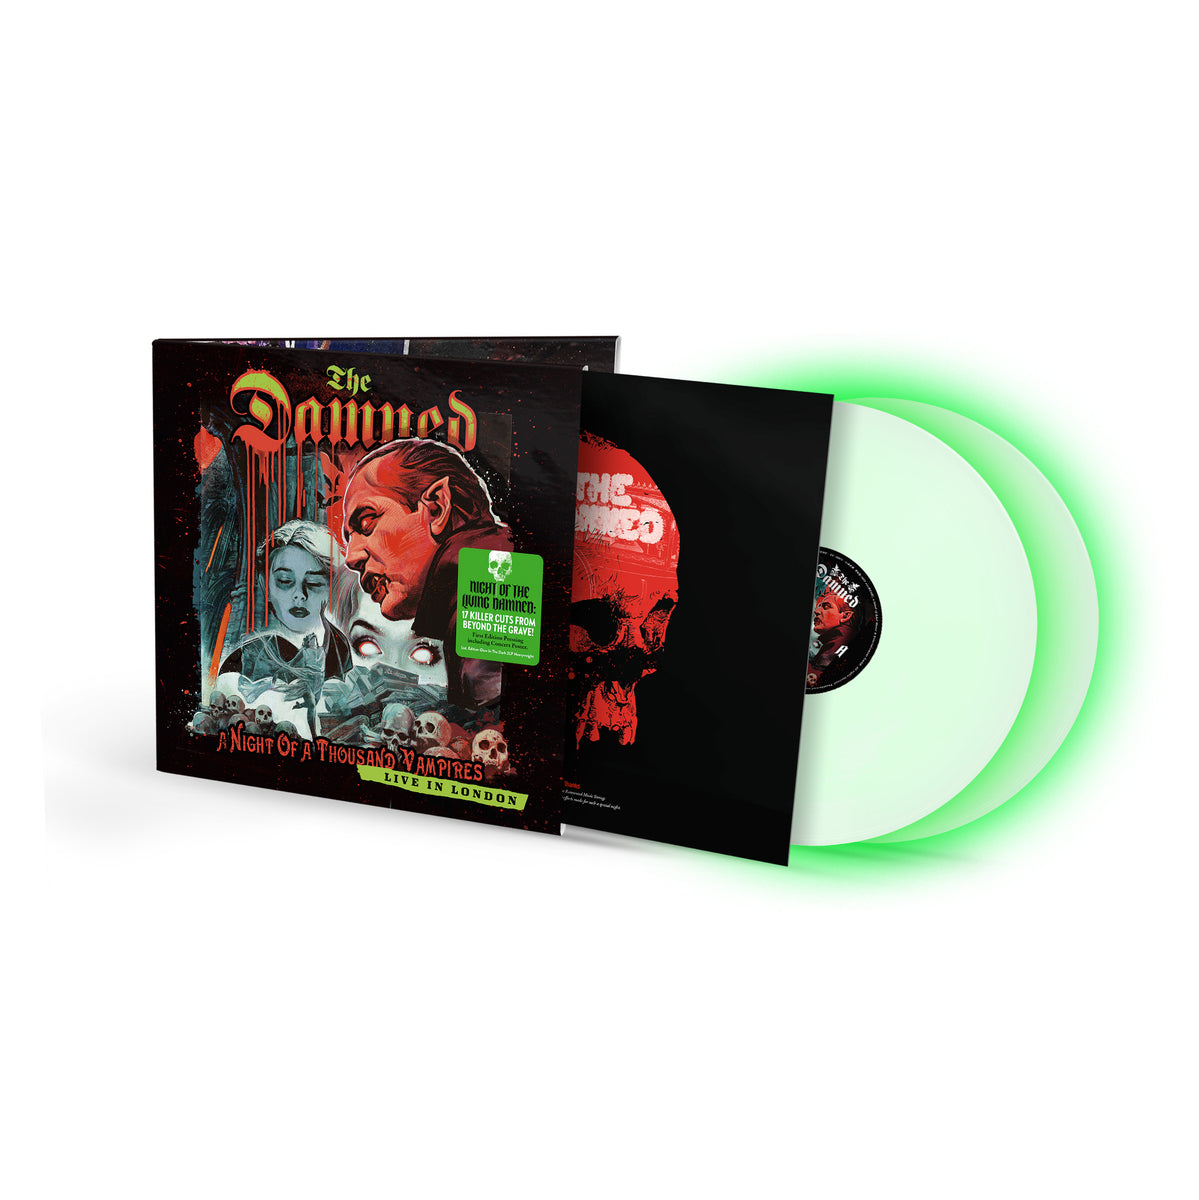 The Damned - A Night Of A Thousand Vampires (Live In London) (Limited Edition Glow In The Dark Vinyl)